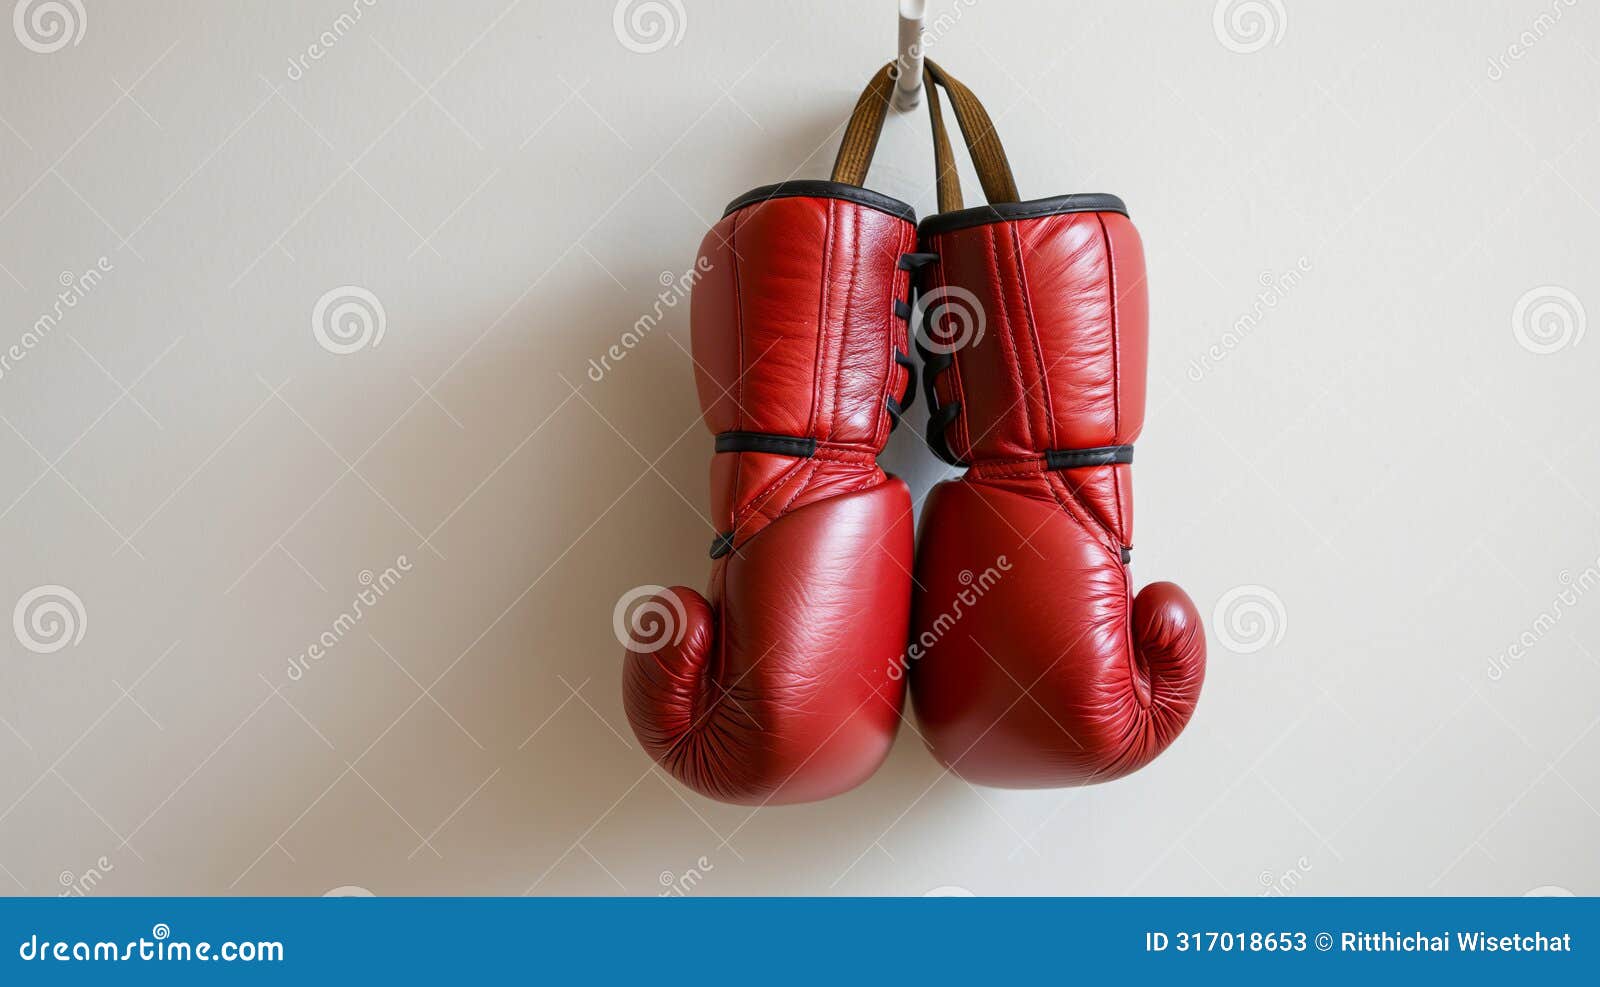 a pair of red boxing gloves hangs on a white wall, izing readiness and strength in sports